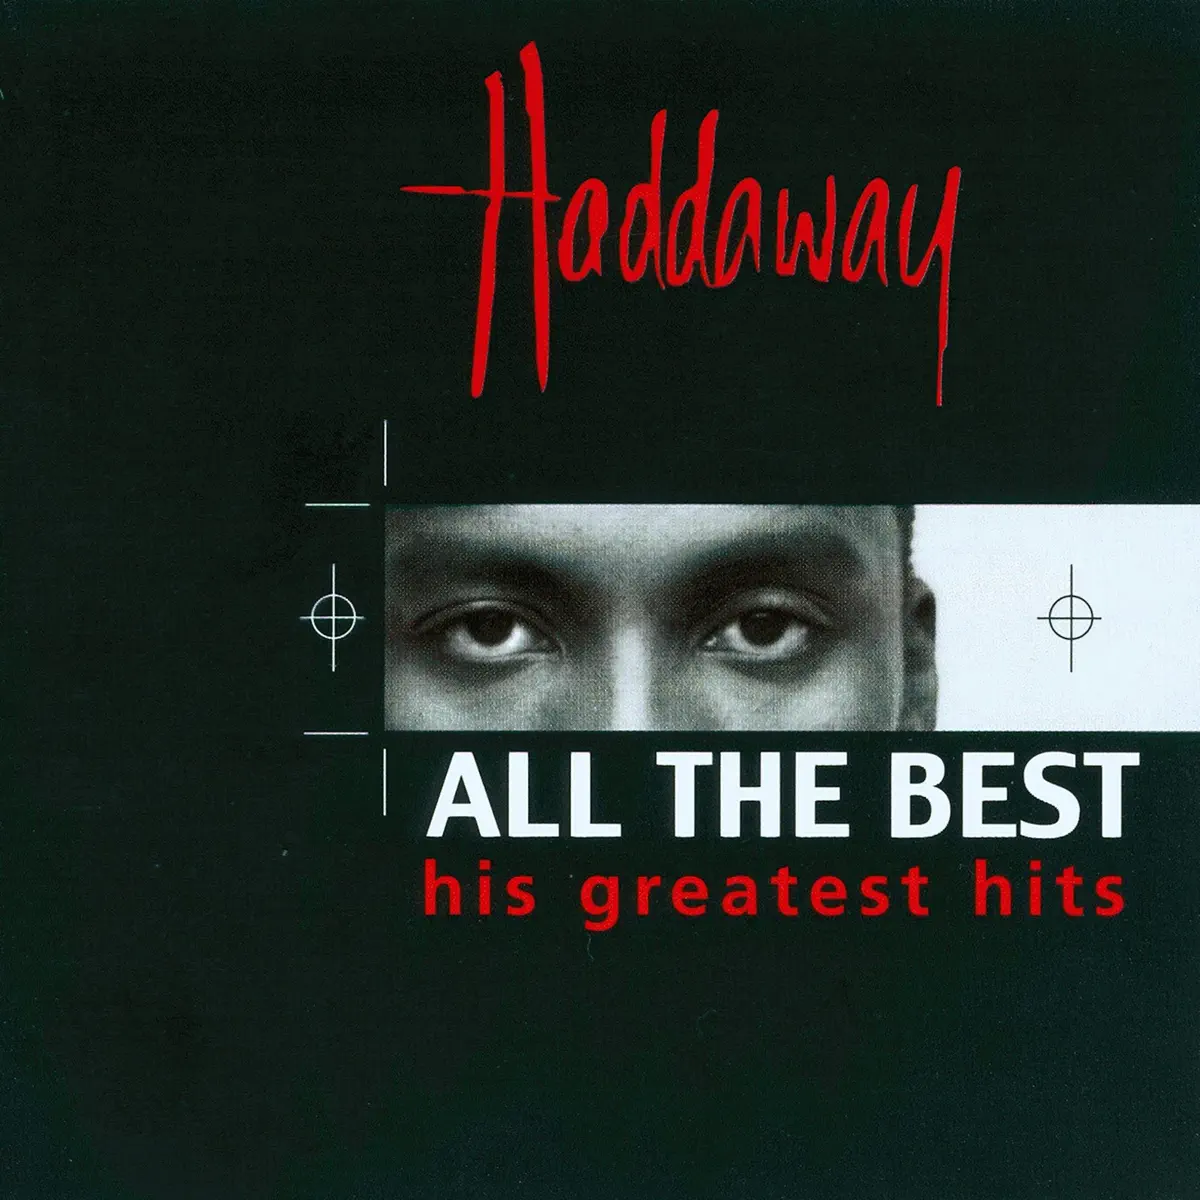 Haddaway - All the Best - His Greatest Hits (1993) [iTunes Plus AAC M4A]-新房子